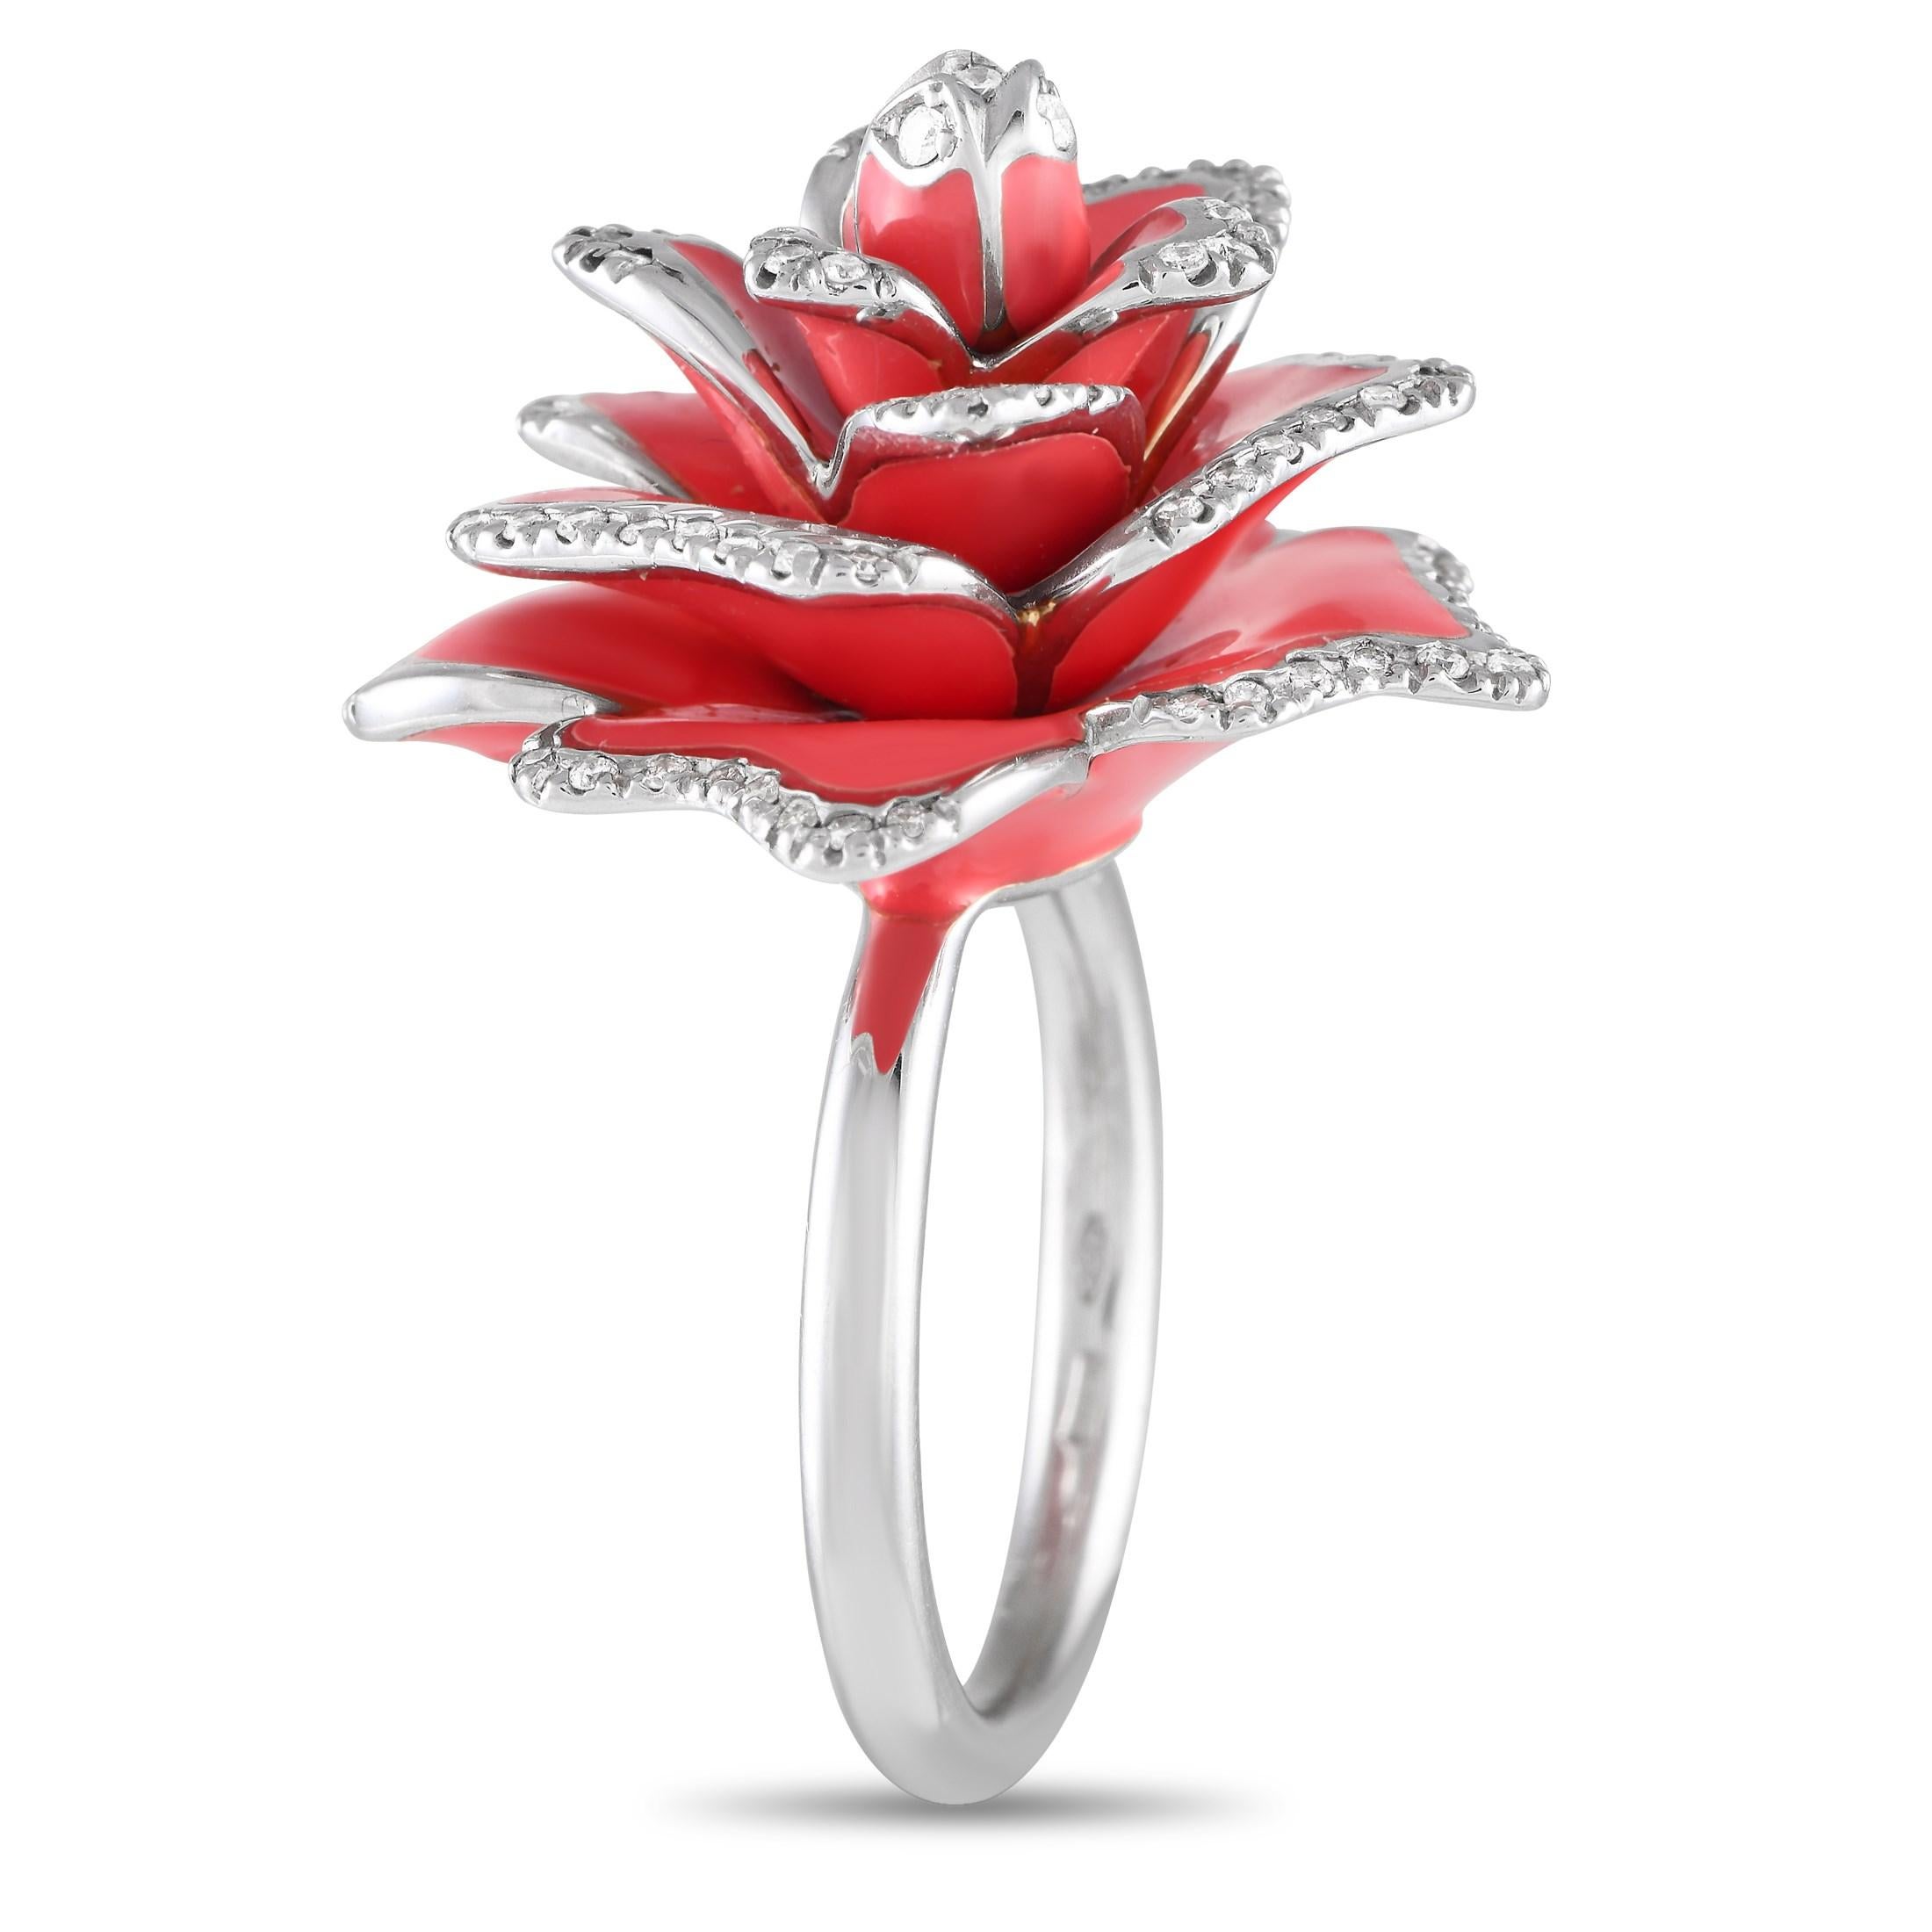 It's impossible not to notice the blooming beauty of this statement ring. A lovely creation by Roberto Coin, this ring features a polished white gold band topped with an oversized sculpture of a rose. The striking blossom has layers and layers of